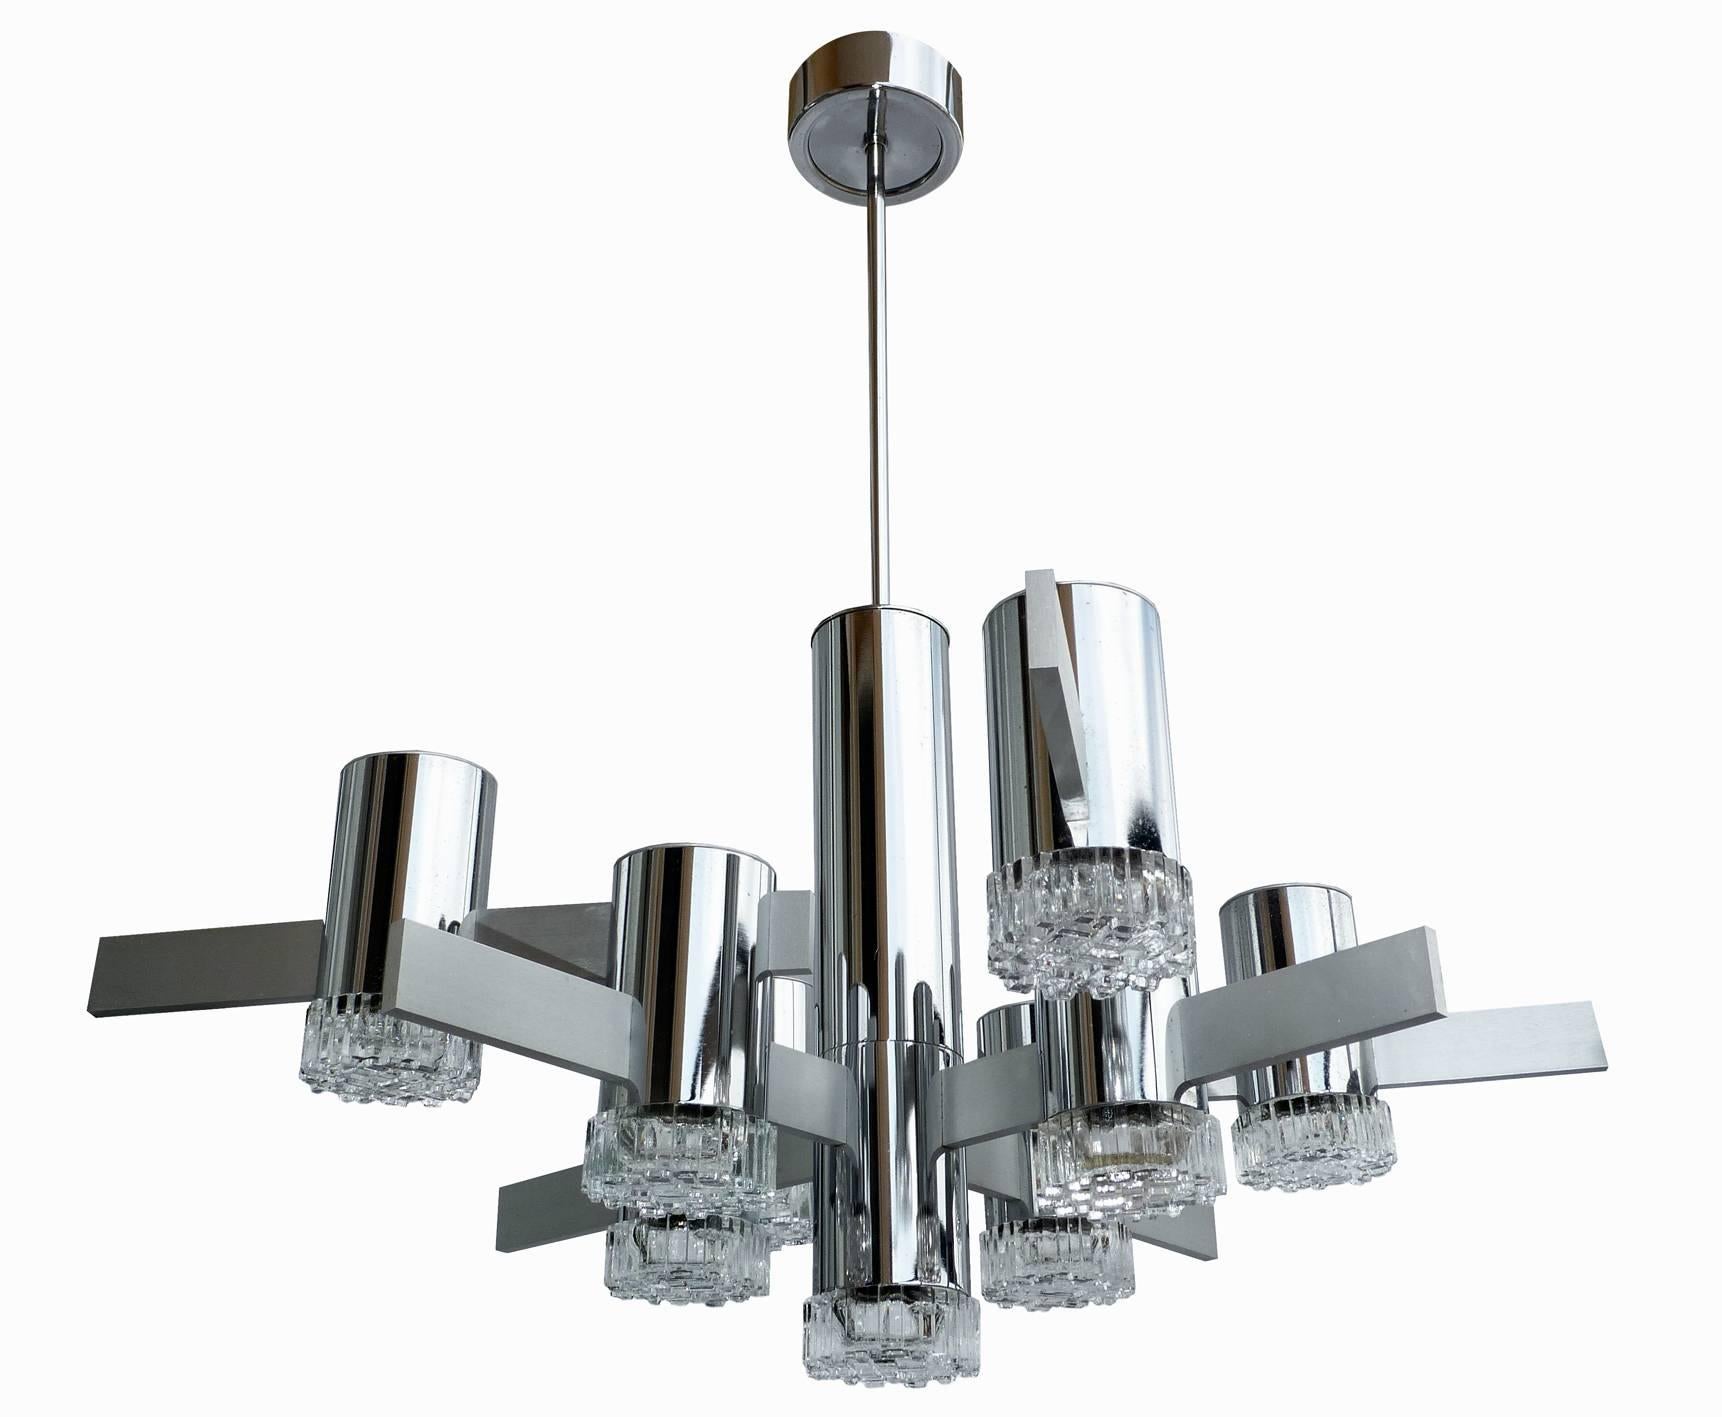 Original sculptural vintage Gaetano Sciolari polished chrome and brushed aluminum chandelier. Nine-light textured glass diffusers on chrome frame. Made in Italy in the 1960s.
Measures: 
Diameter 34 in / 85 cm
Height 34 in / 85 cm
Weight 22 lb/ 10